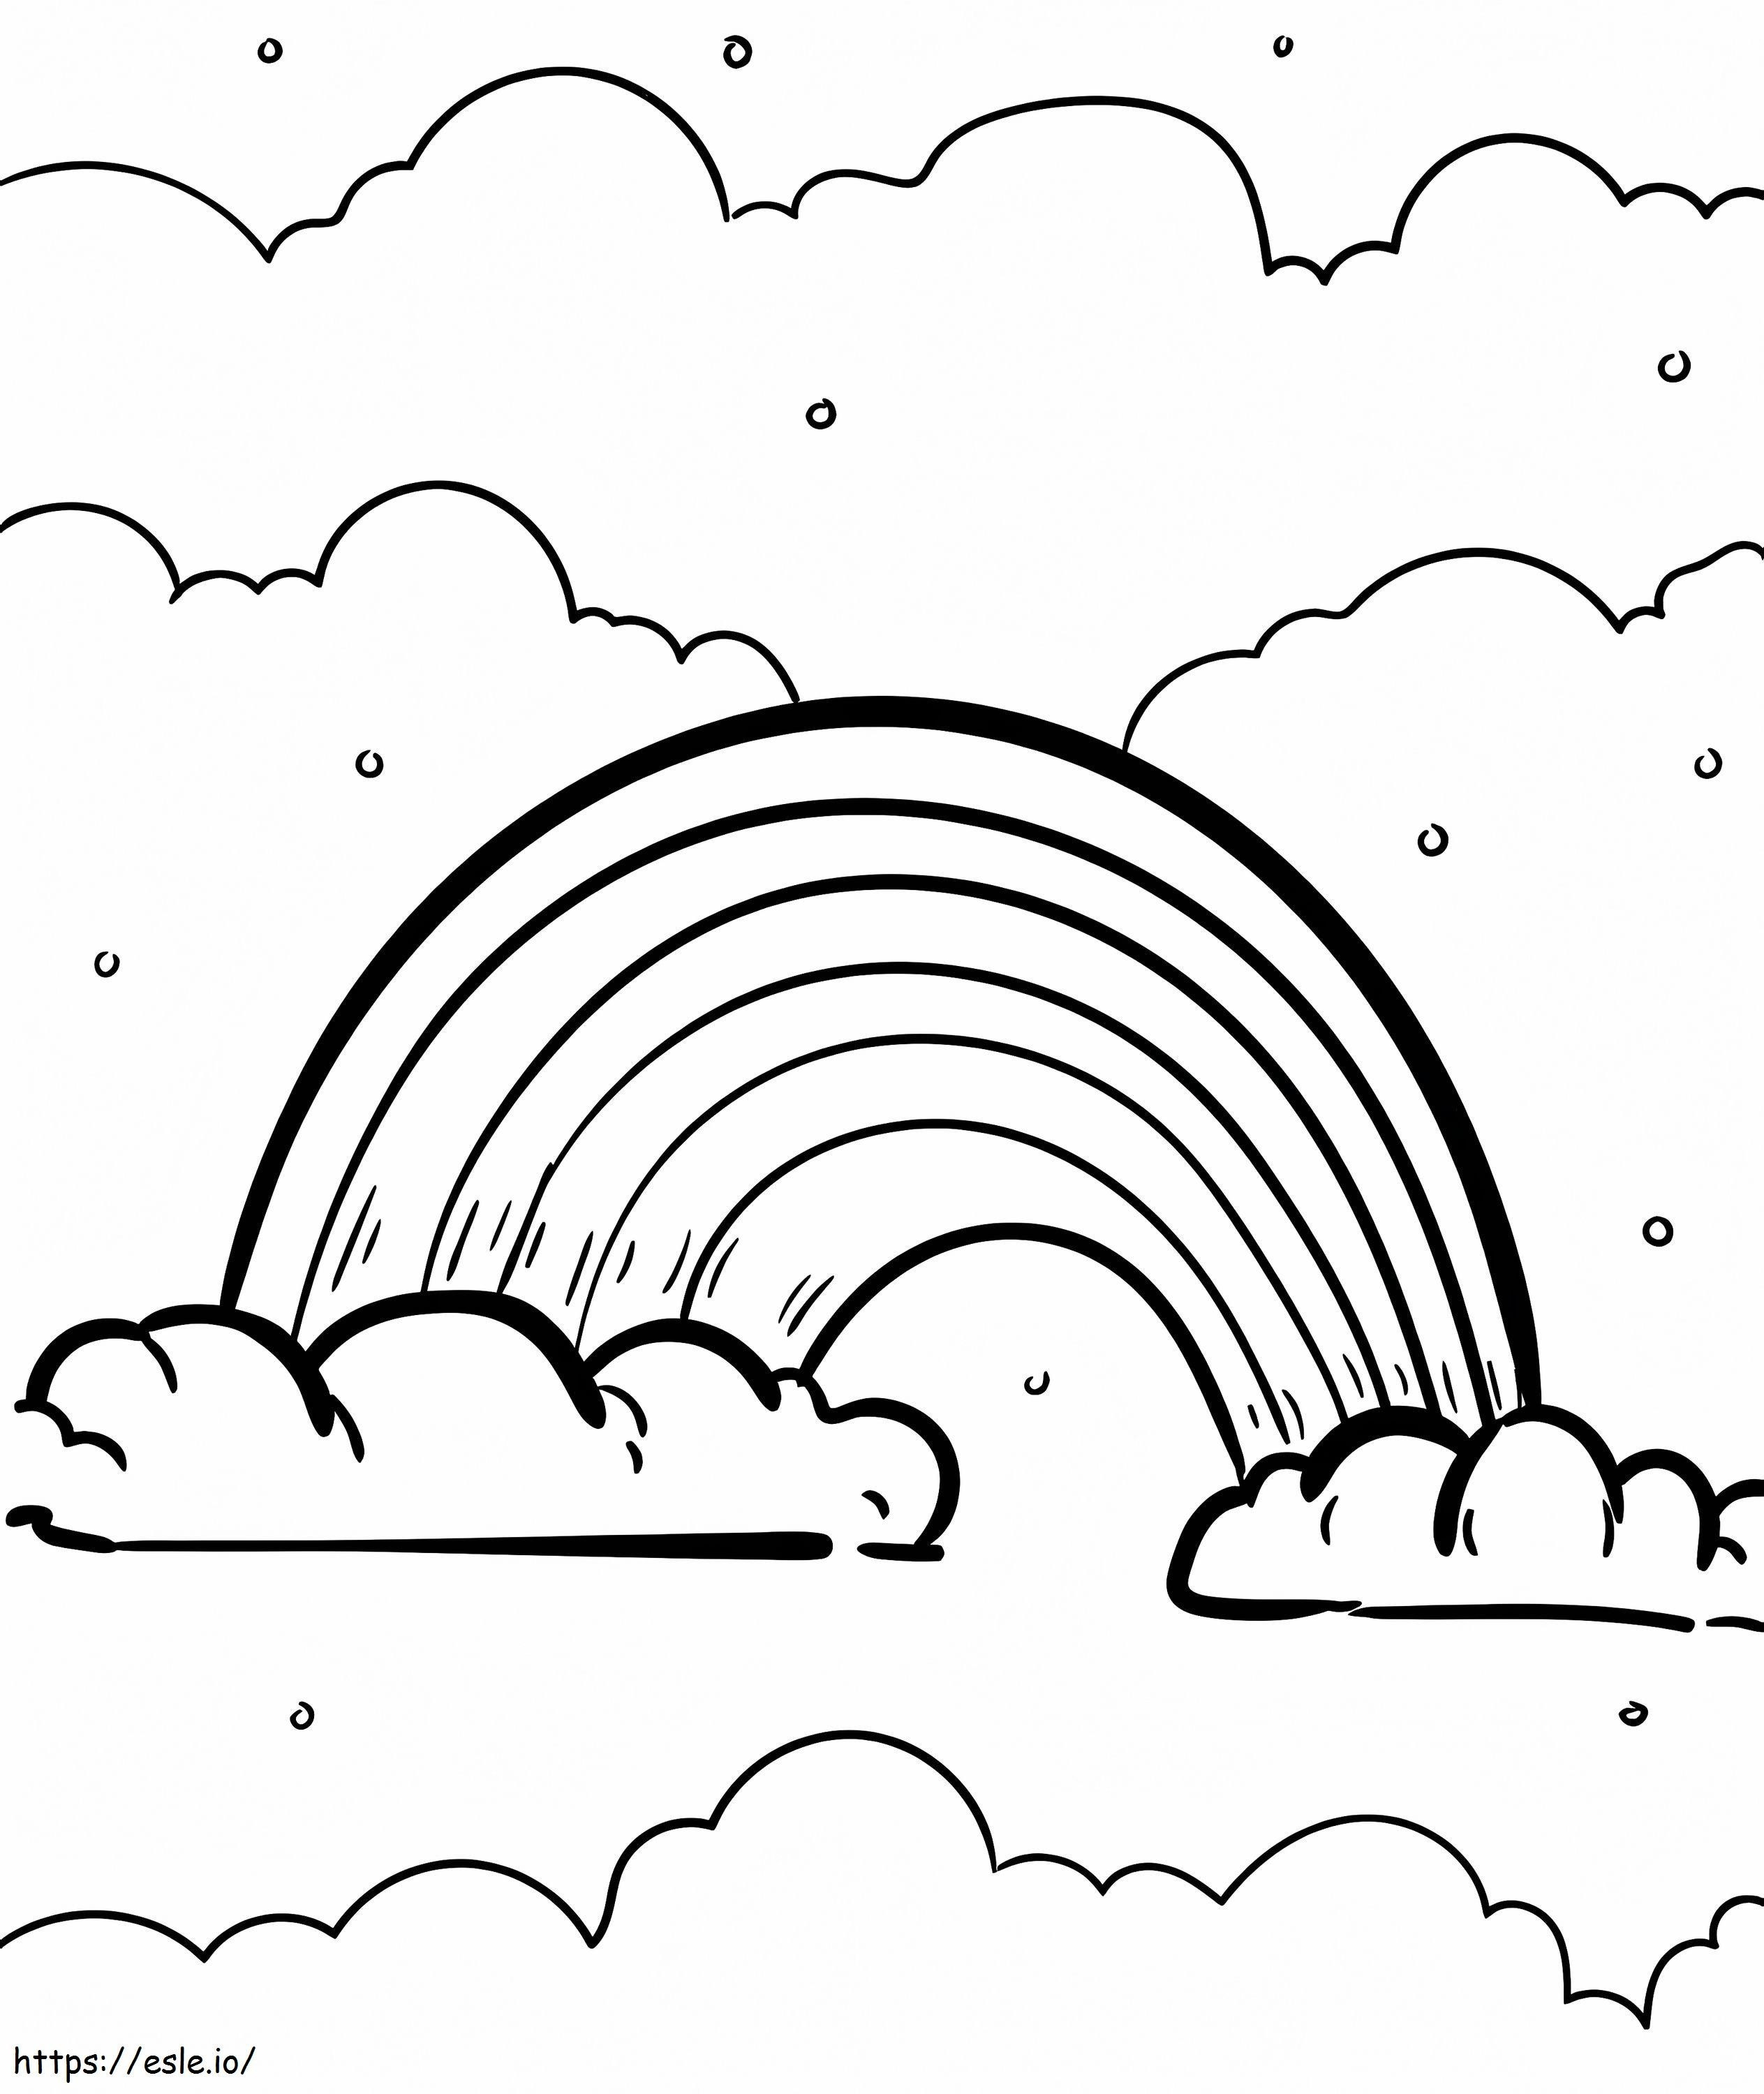 Rainbow For Kid coloring page